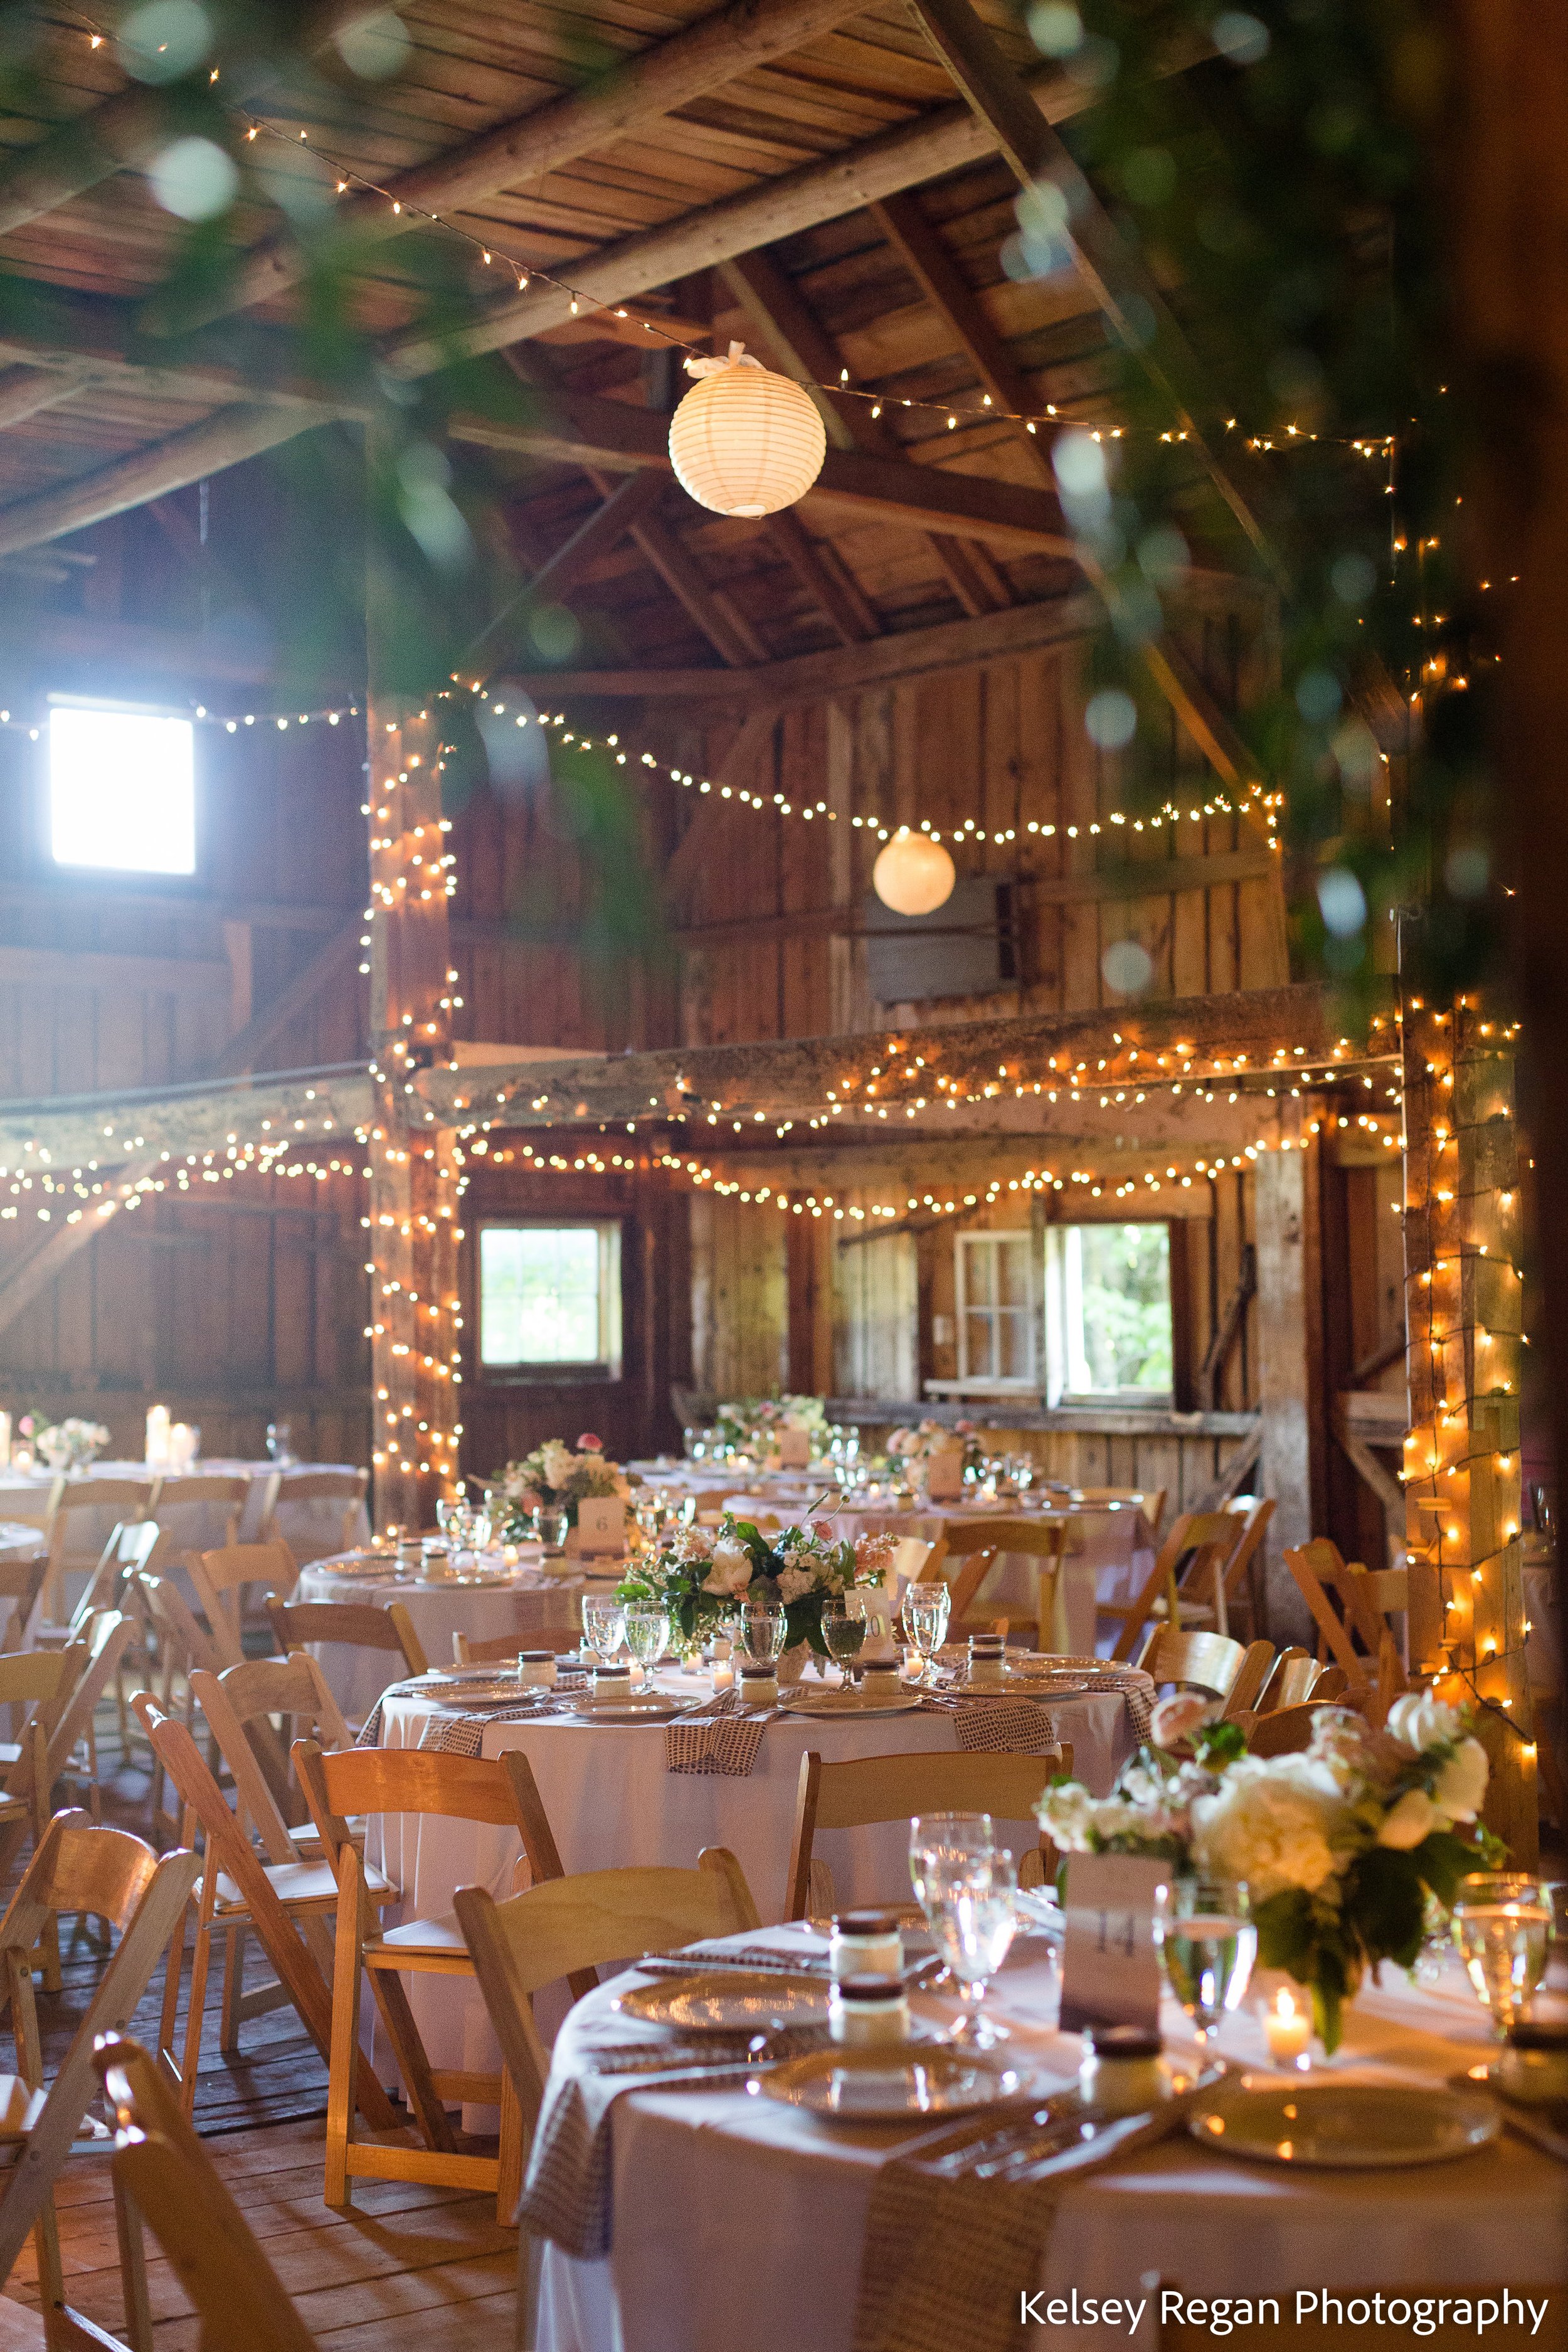 A barn lit up and filled with decorated tables set for a reception